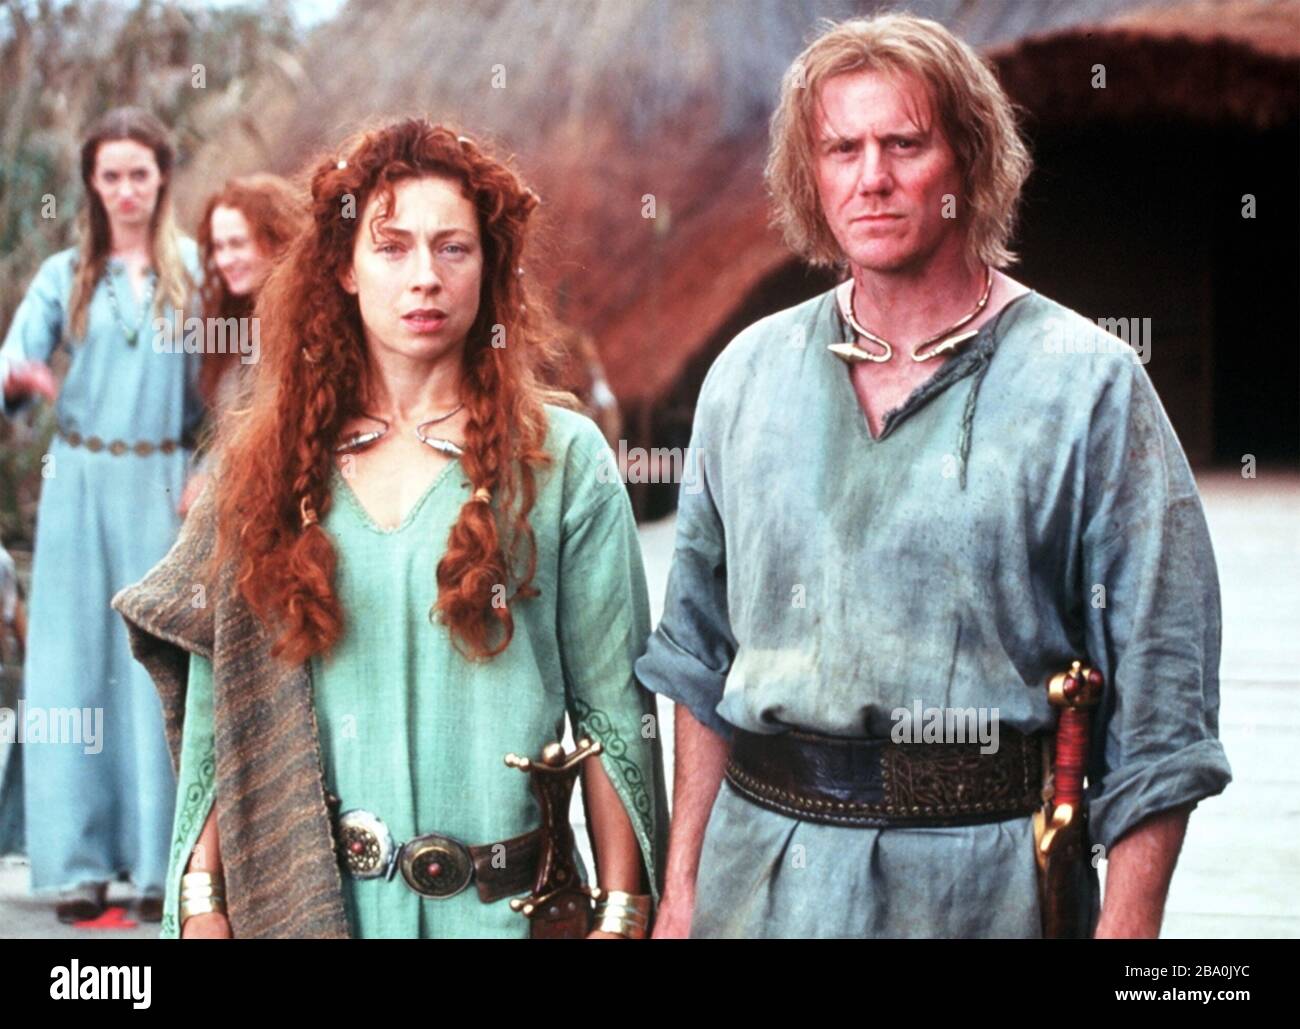 BOUDICA (aka Warrior Queen) ) 2003 ITV tv film with Alex Kingston as Boudica and Steve Waddington. Emily Blunt at far left. Stock Photo